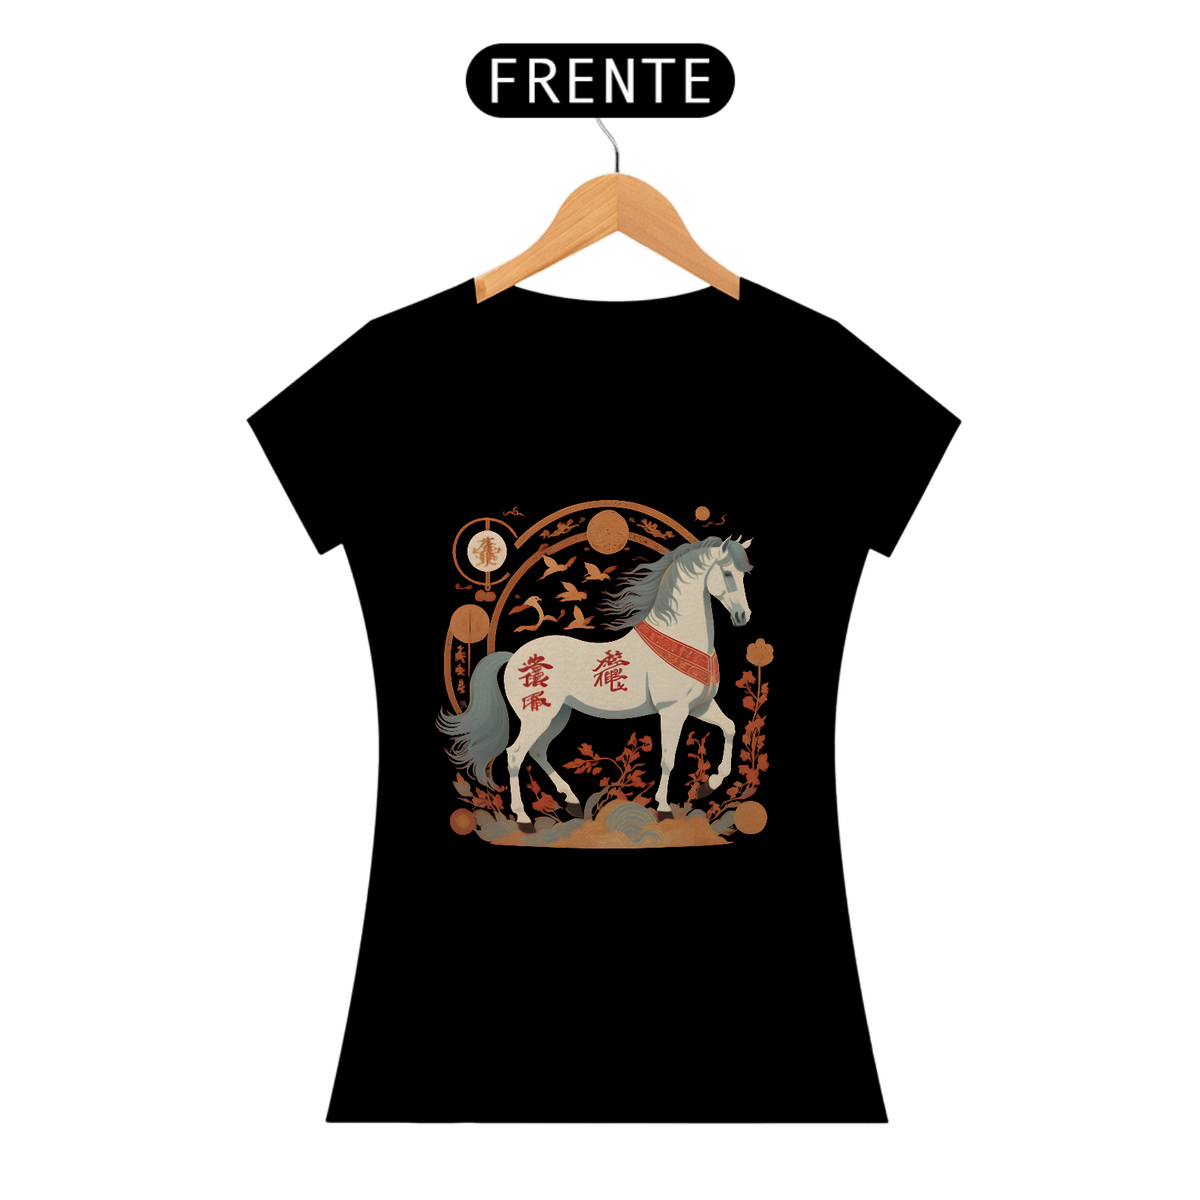 Nome do produto: Chinese New Year (Eclipse) - T-Shirt Baby Look White Horse